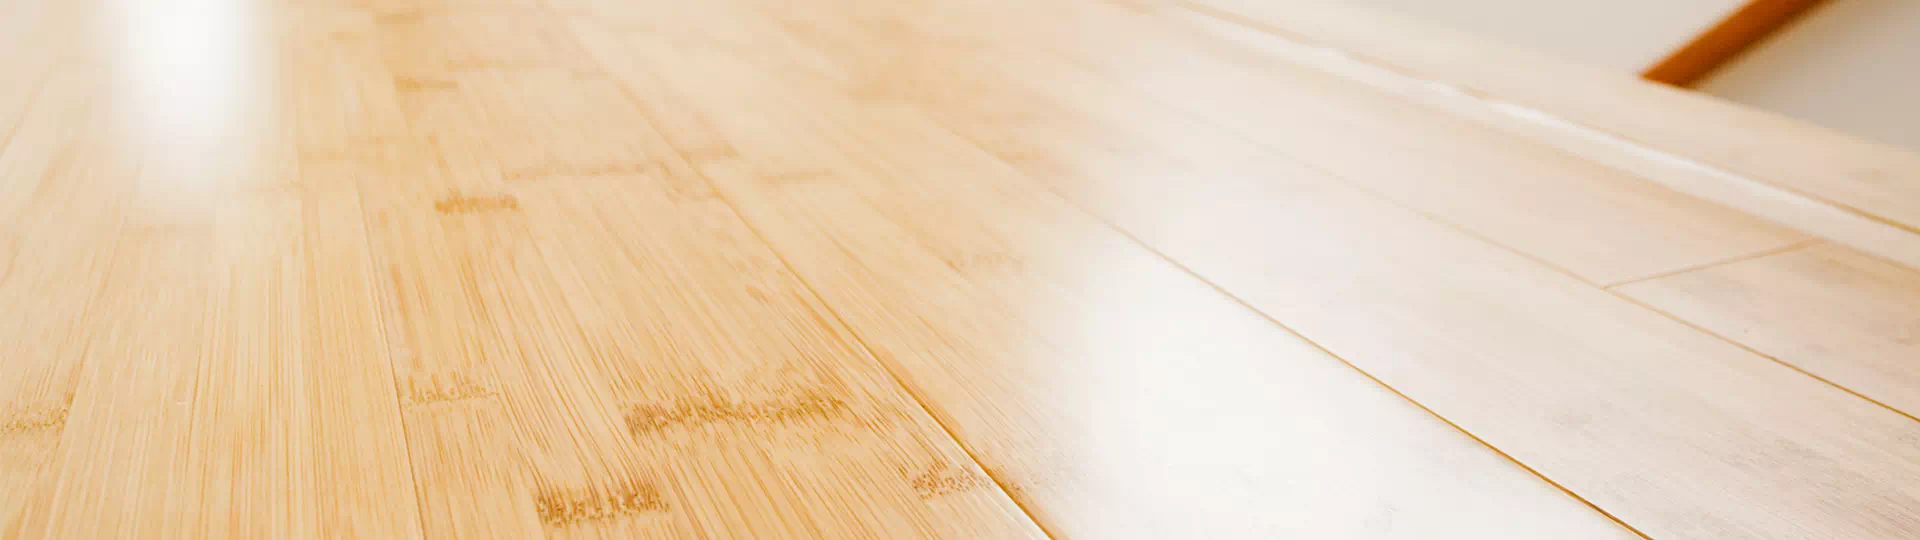 How To Clean Bamboo Floors Simple Green, Is Bamboo Flooring More Durable Than Hardwood